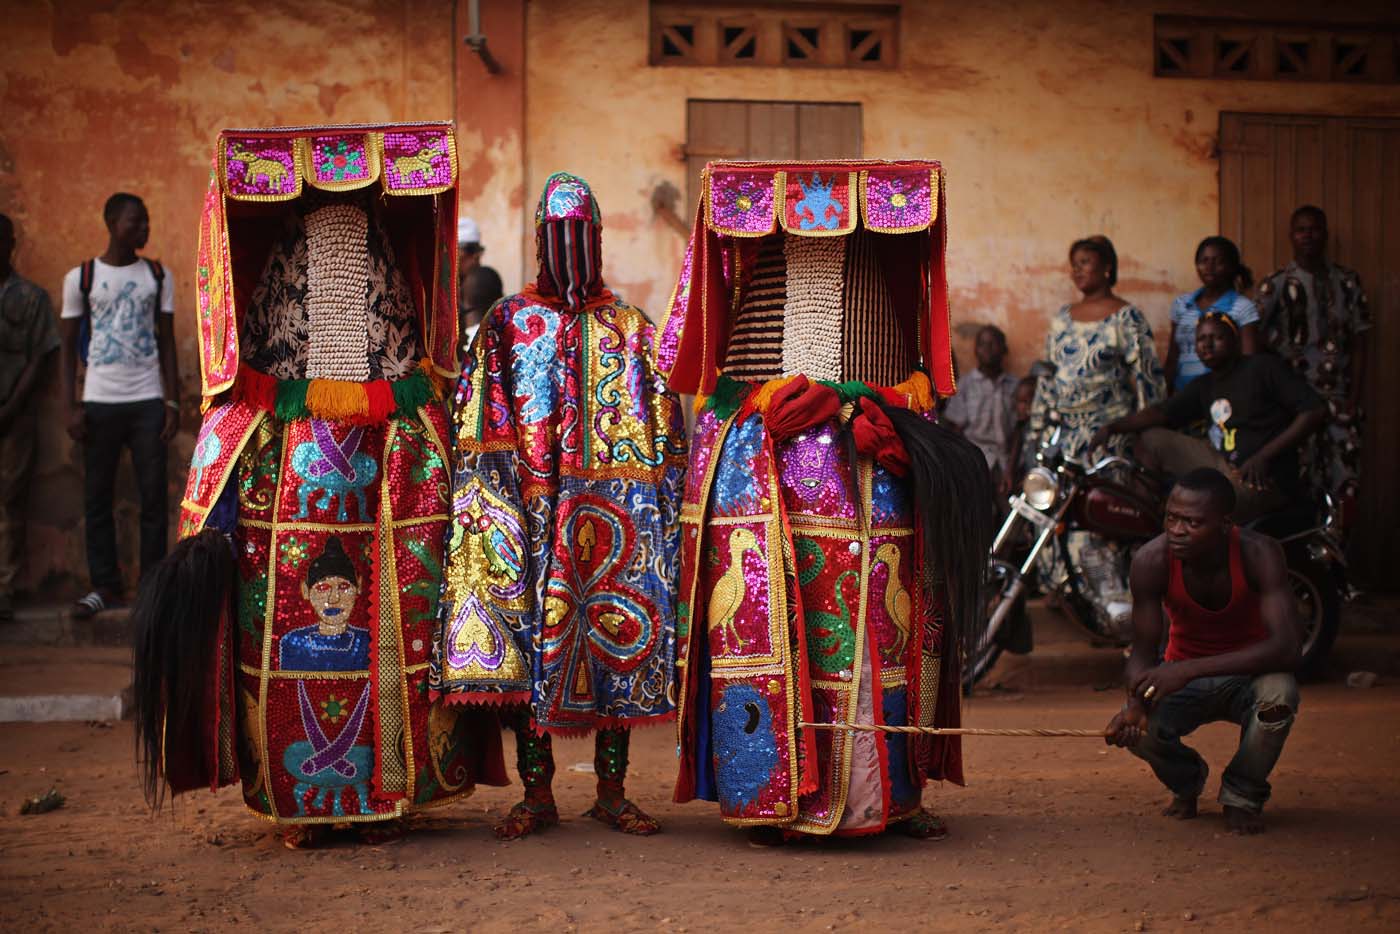 OUIDAH, BENIN - JANUARY 11: Egungun spirits perform during a Voodoo ceremony on January 11, 2012 in Ouidah, Benin. The Egungun are masqueraded dancers that represents the ancestral spirits of the Yoruba, a Nigerian ethnic group, and are believed to visit earth to possess and give guidance to the living. Ouidah is Benin's Voodoo heartland, and thought to be the spiritual birthplace of Voodoo or Vodun as it known in Benin. Shrouded in mystery and often misunderstood, Voodoo was acknowledged as an official religion in Benin in 1989, and is increasing in popularity with around 17 percent of the population following it. A week of activity centred around the worship of Voodoo culminates on the 10th of January when people from across Benin as well as Togo and Nigeria decend on the town for the annual Voodoo festival.  (Photo by Dan Kitwood/Getty Images) ORG XMIT: 136723721